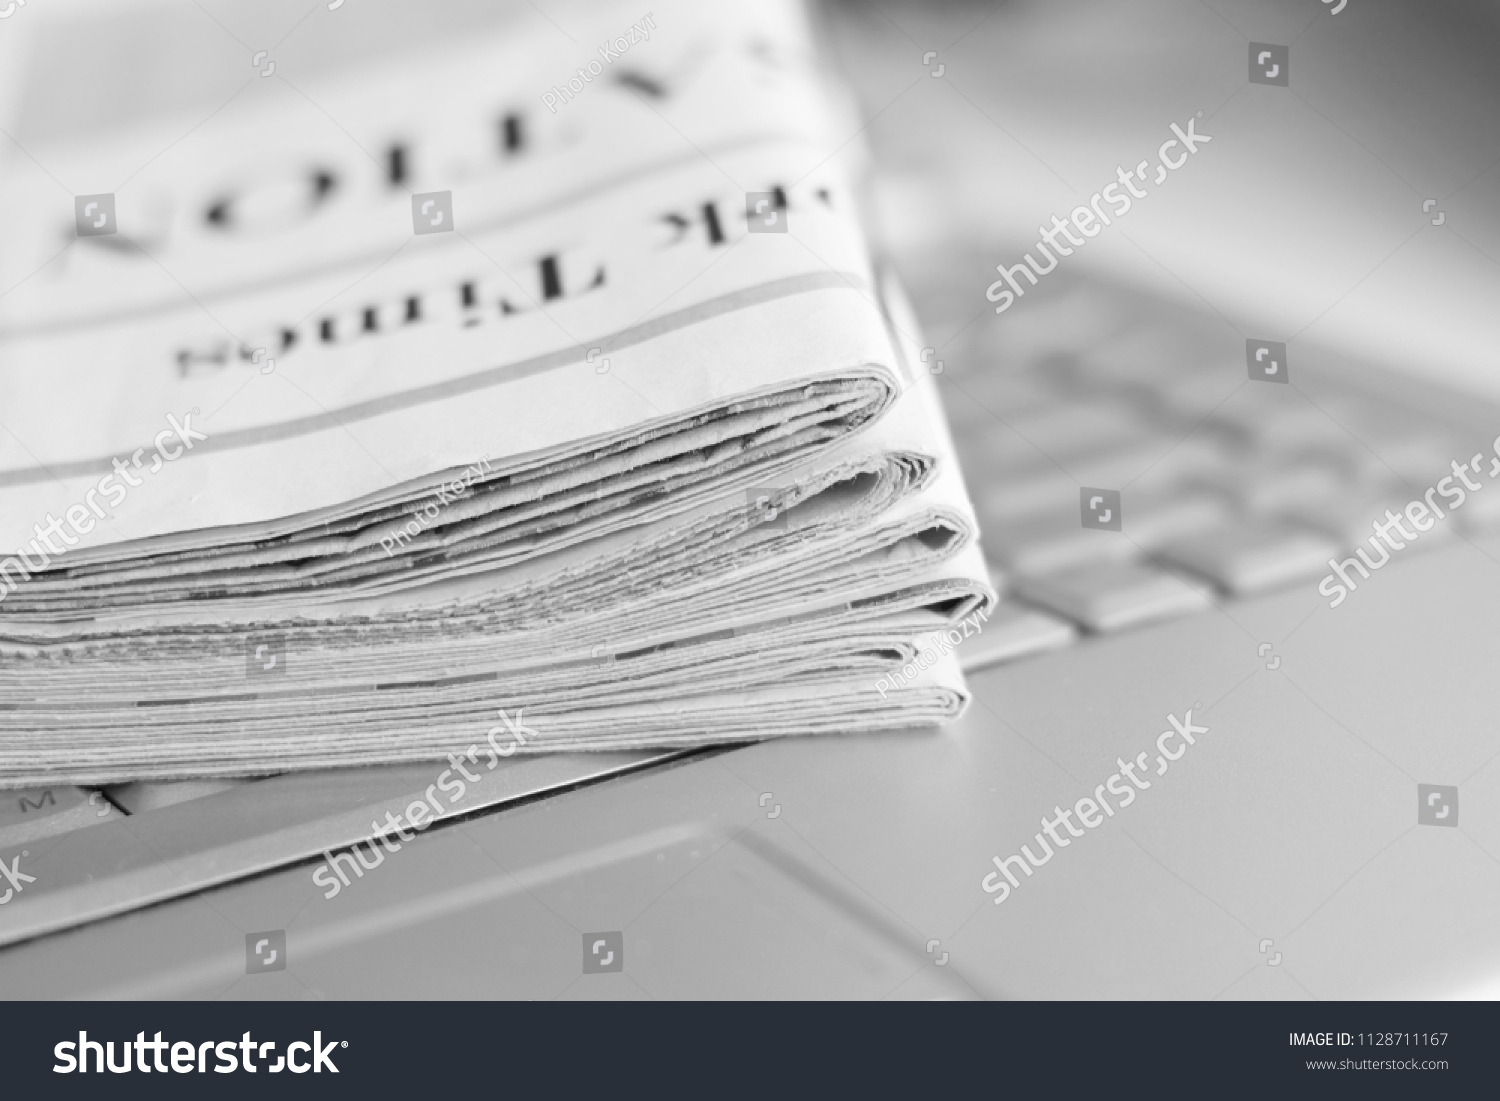 Newspapers and laptop. Pile of daily papers with news on the computer. Pages with headlines, articles folded and stacked on keypad of electronic device. Modern gadget and old journals, focus on paper  #1128711167